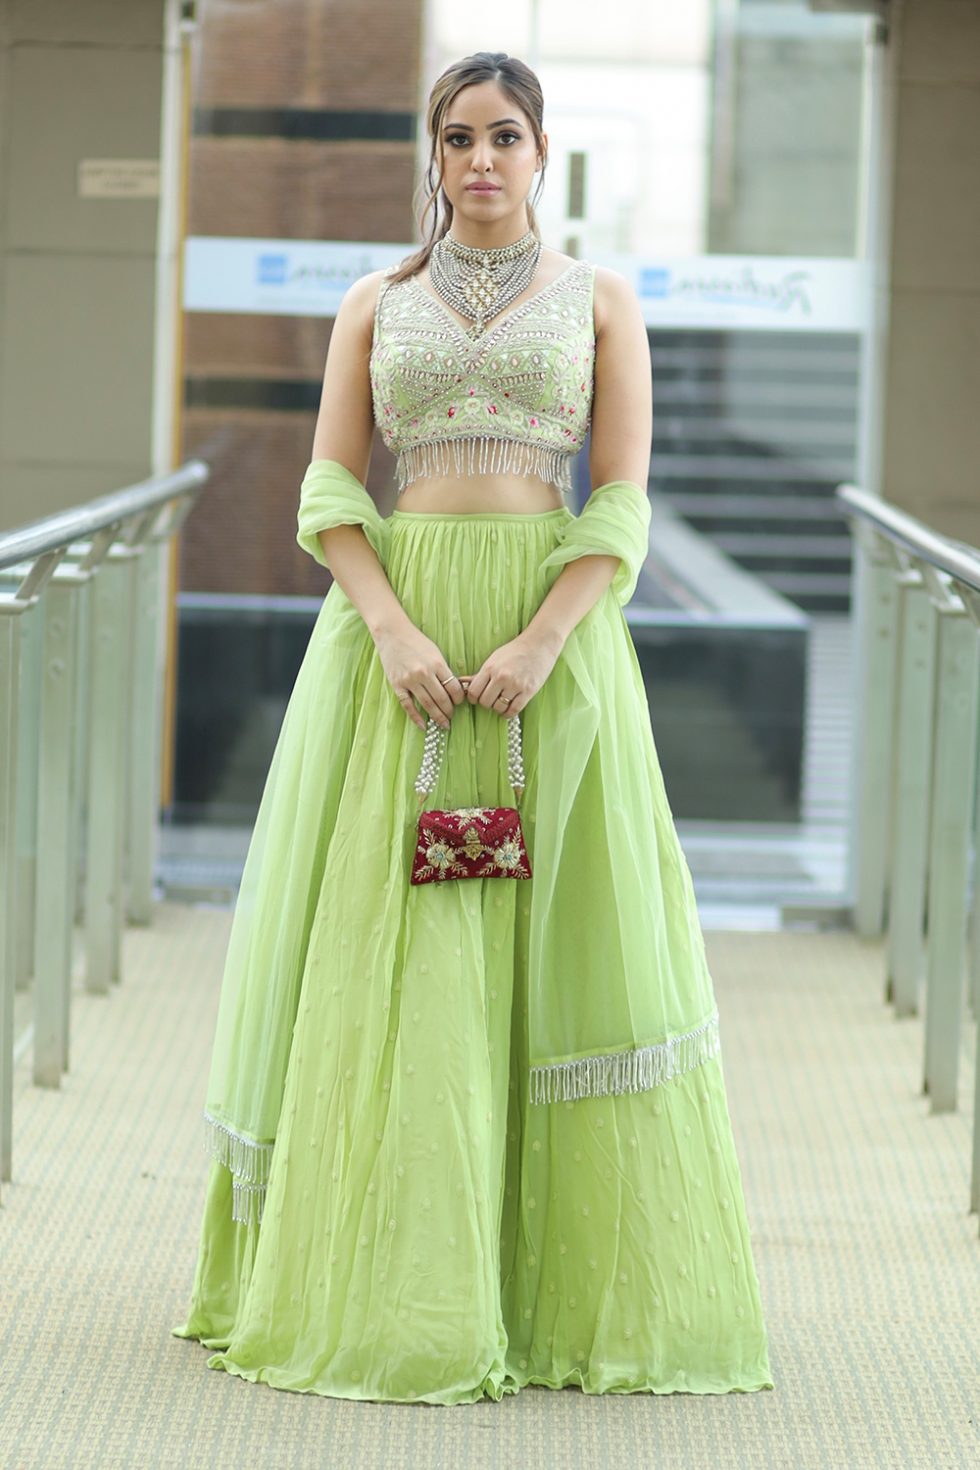 Brides Who Wore Shades Of Green On Their Wedding Day! | Indian bridal  outfits, Pakistani wedding outfits, Indian wedding outfits